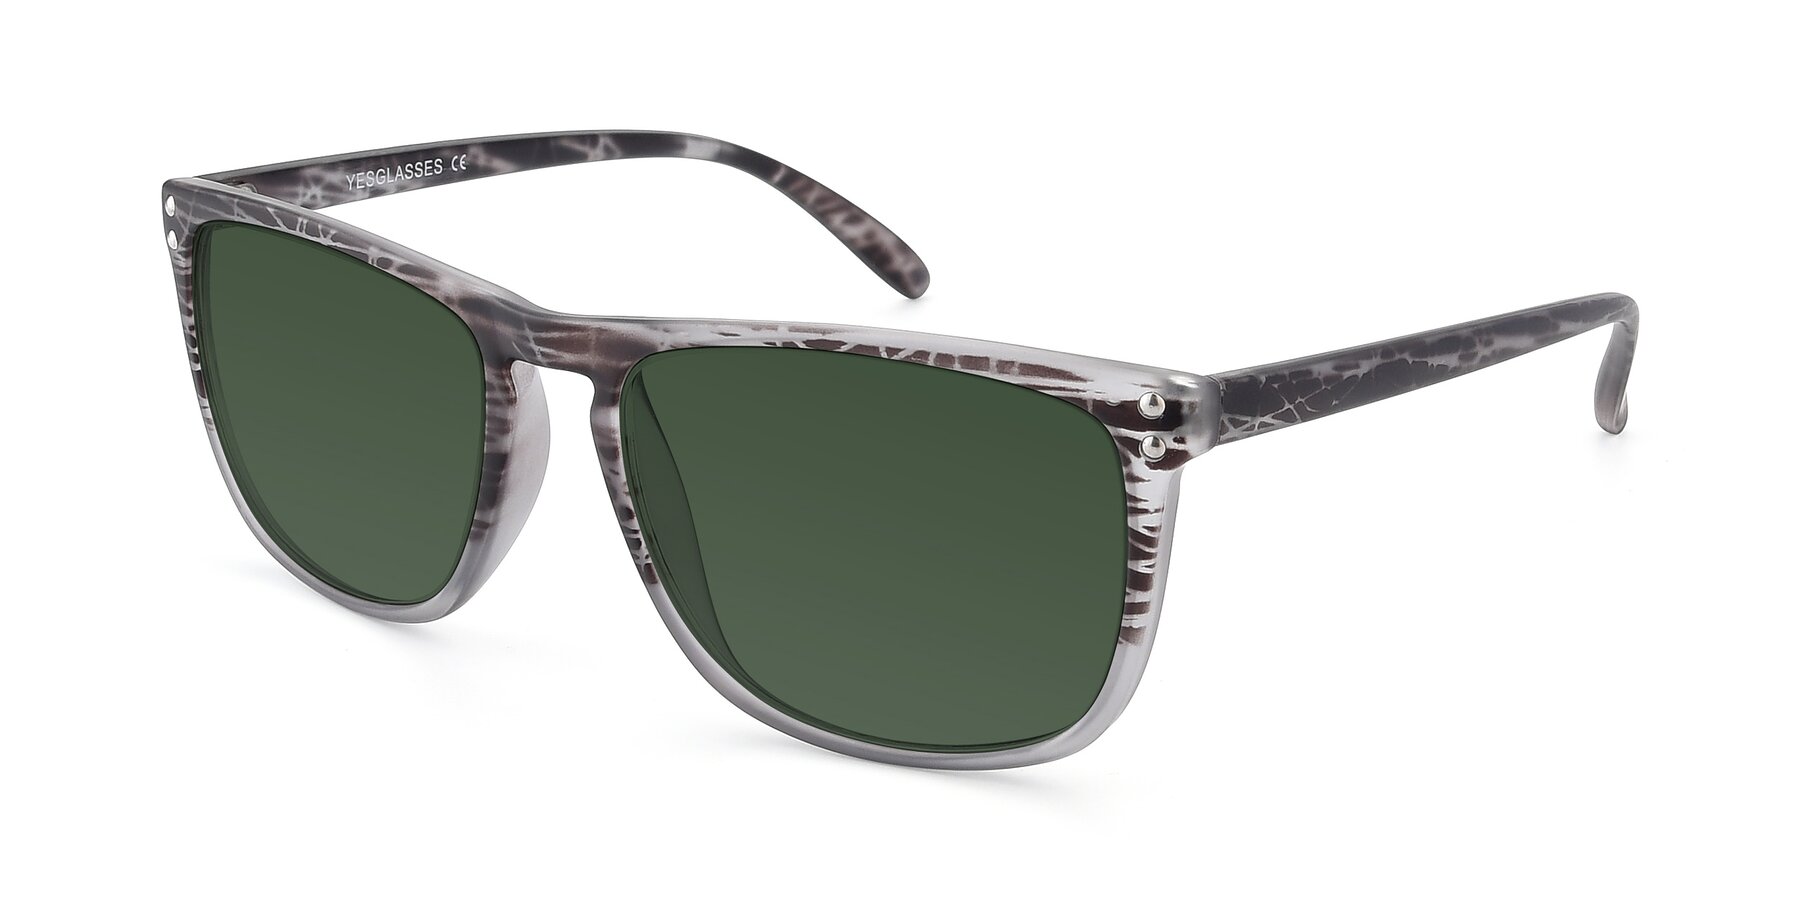 Angle of SSR411 in Translucent Floral Grey with Green Tinted Lenses